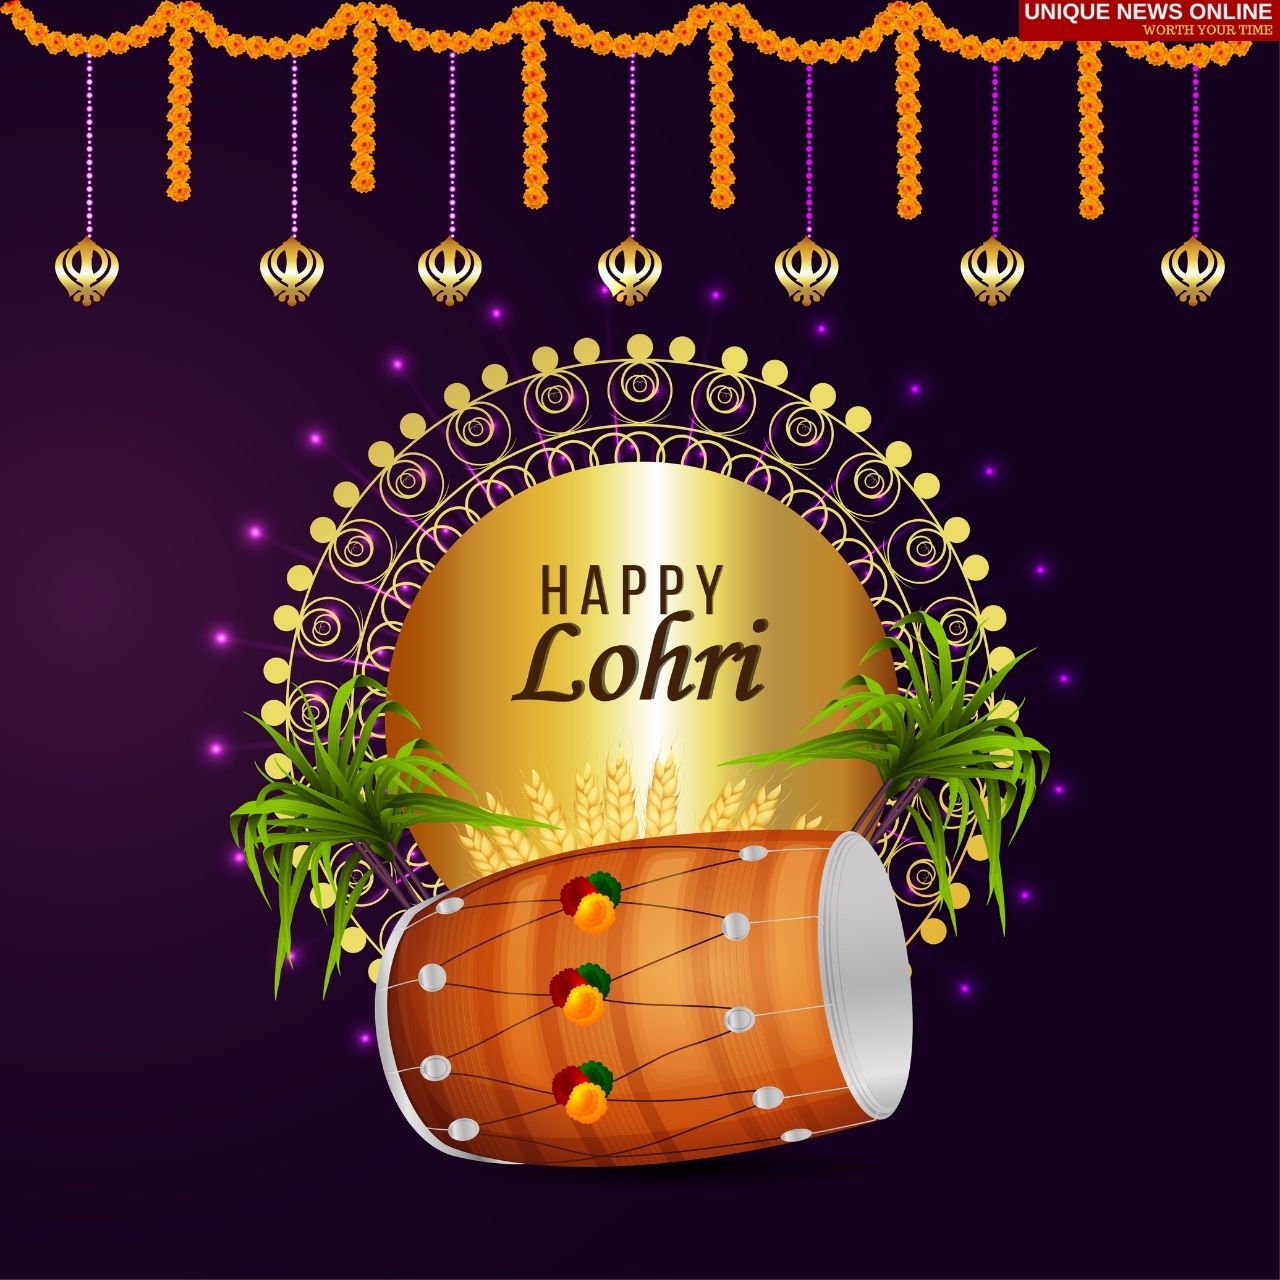 Lohri 2022 WhatsApp Status Video to Download to greet your loved ones